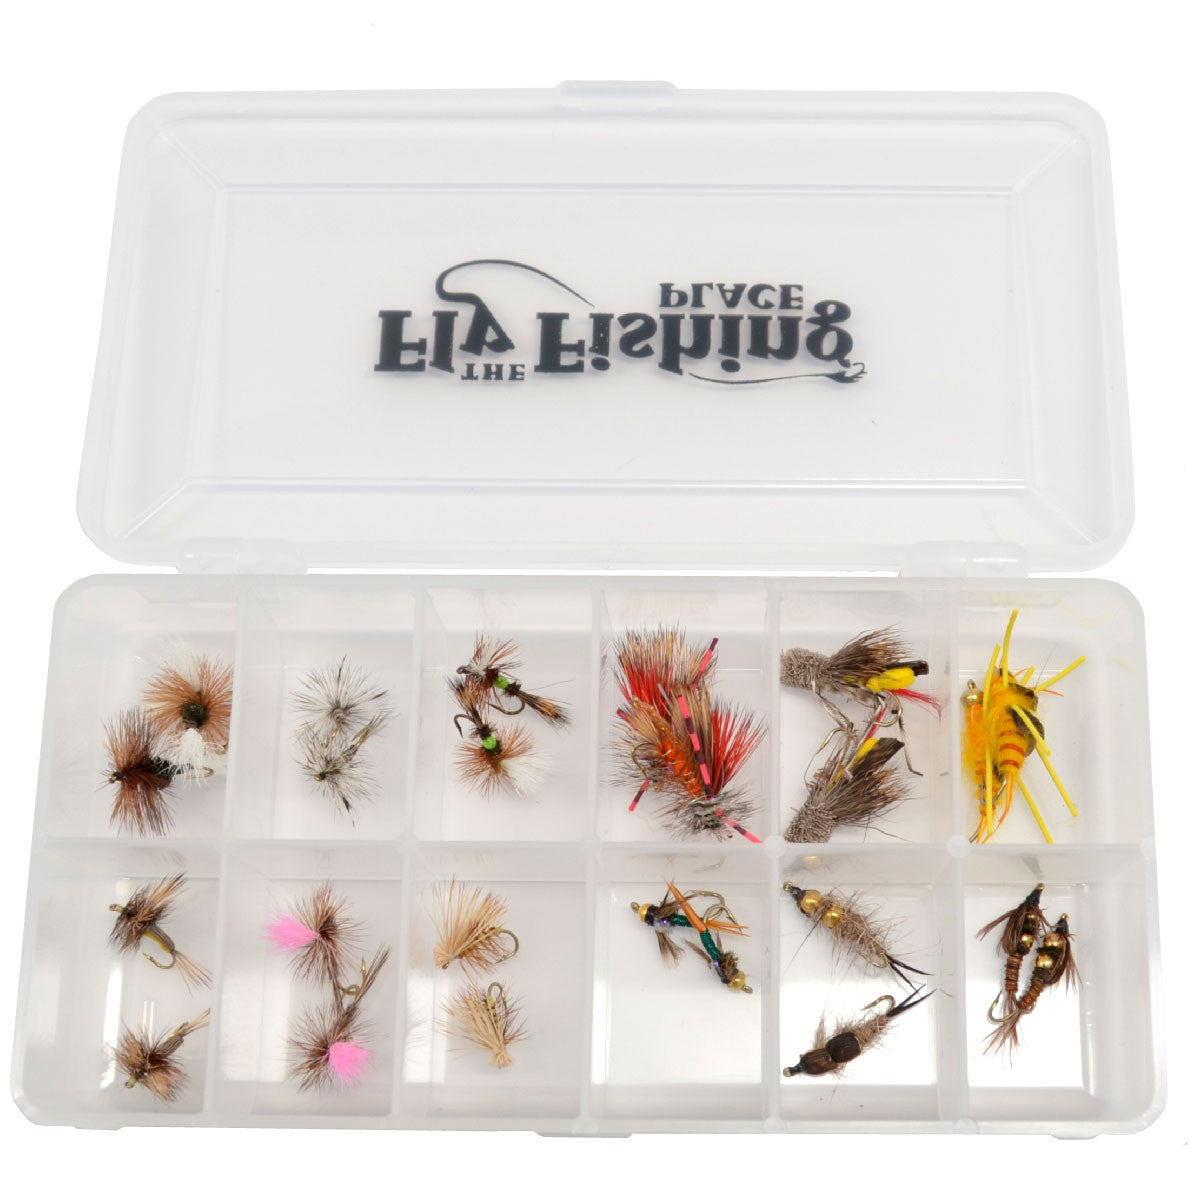 Trout Fly Assortment - Essential Western Dry and Nymph Fly Fishing Flies Collection - 2 Dozen Trout Flies with Fly Box